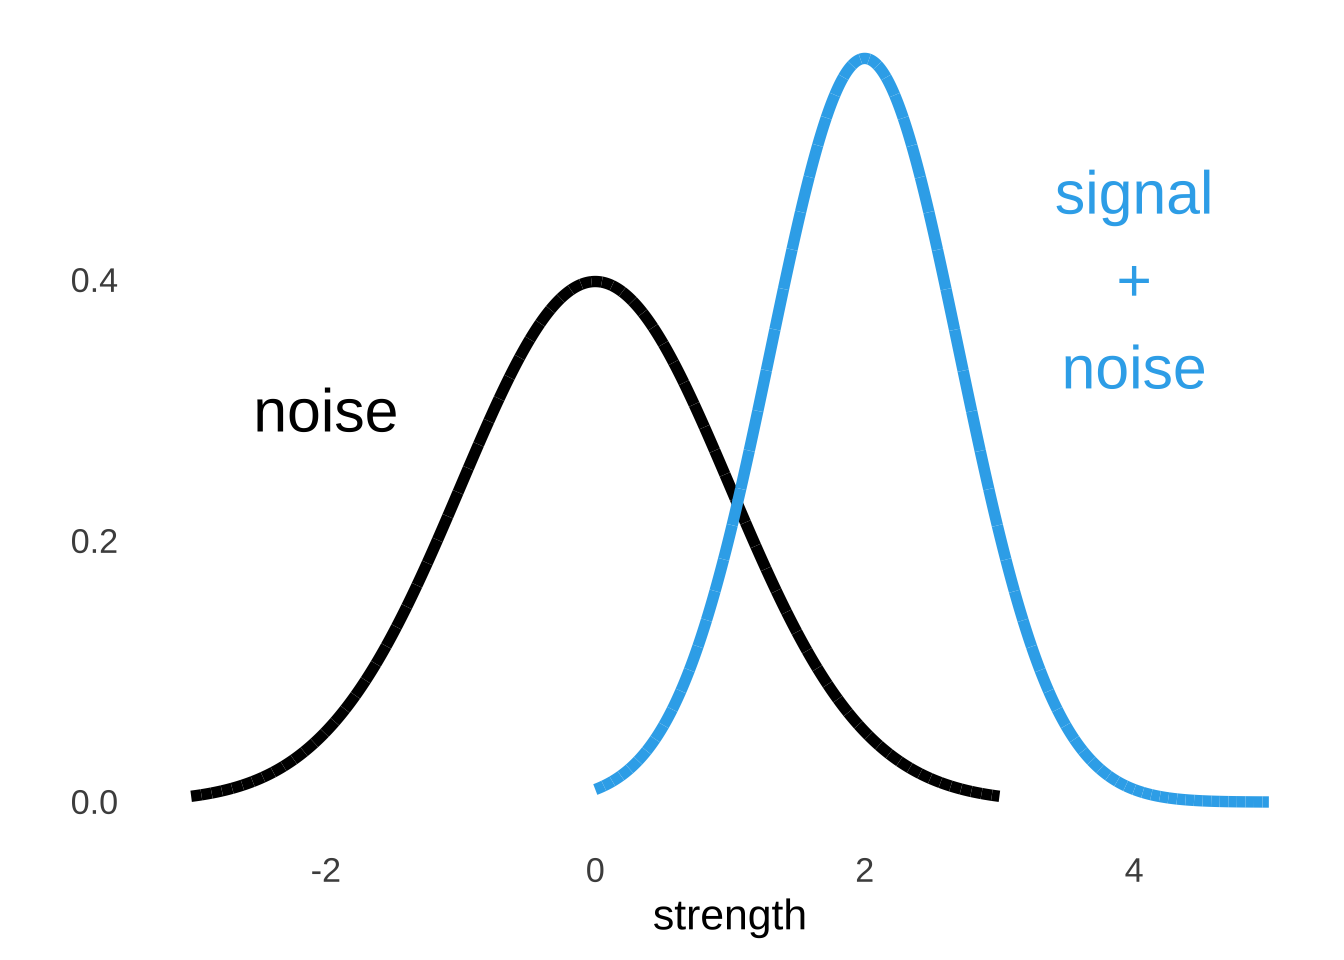 Illustration of Noise and Signal + Noise Distributions